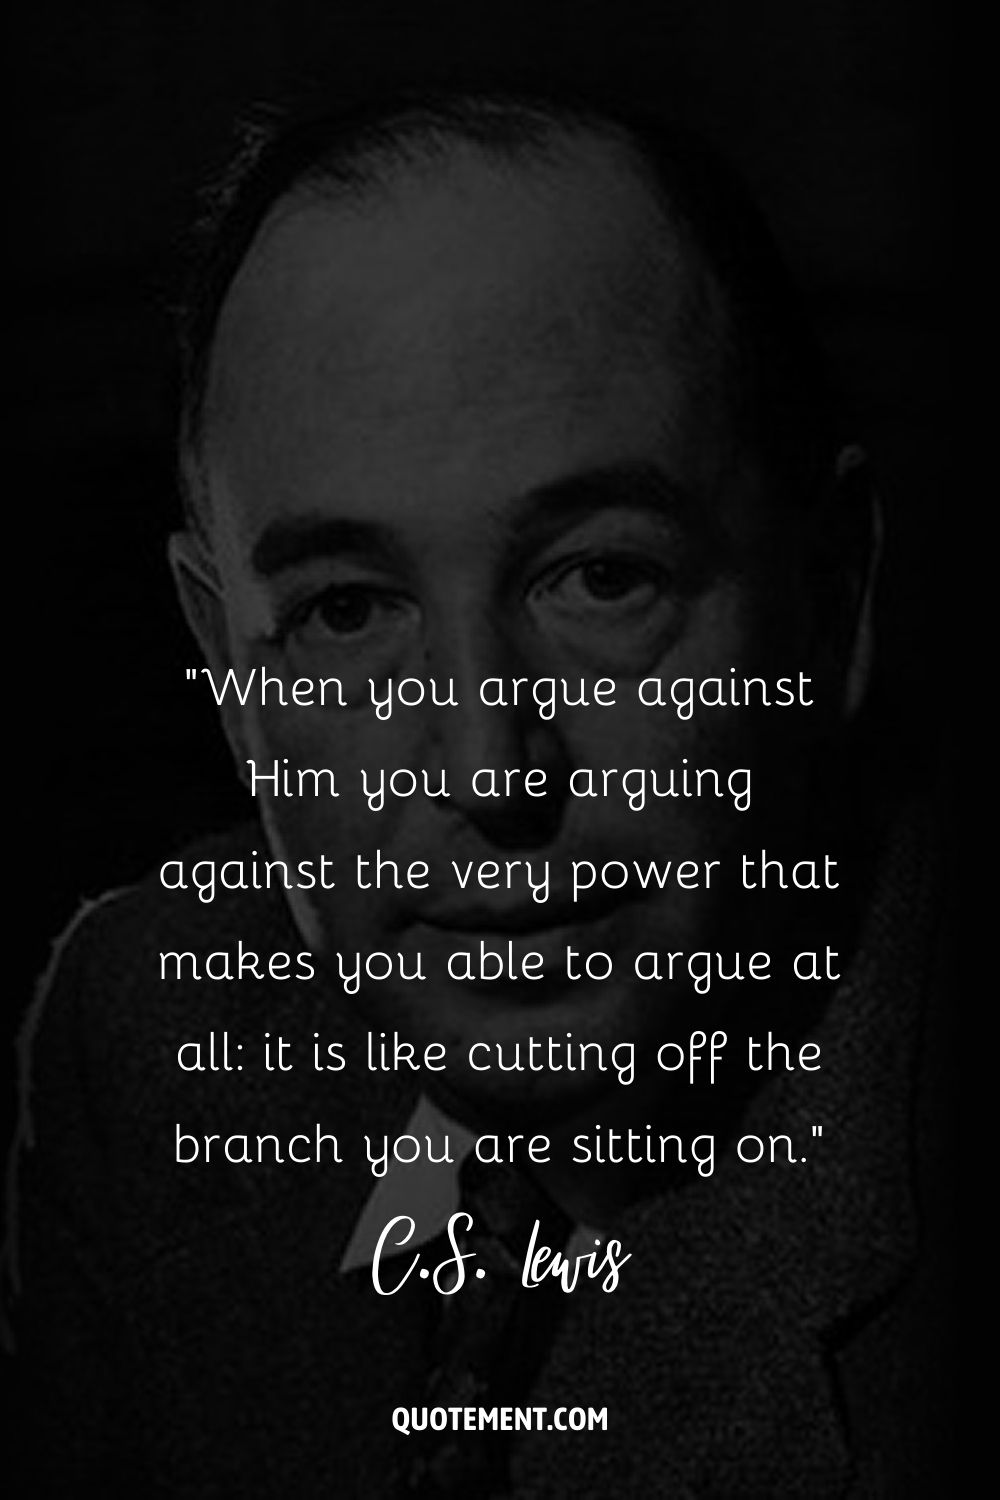 C.S. Lewis poses in grayscale, adorned in a coat and tie